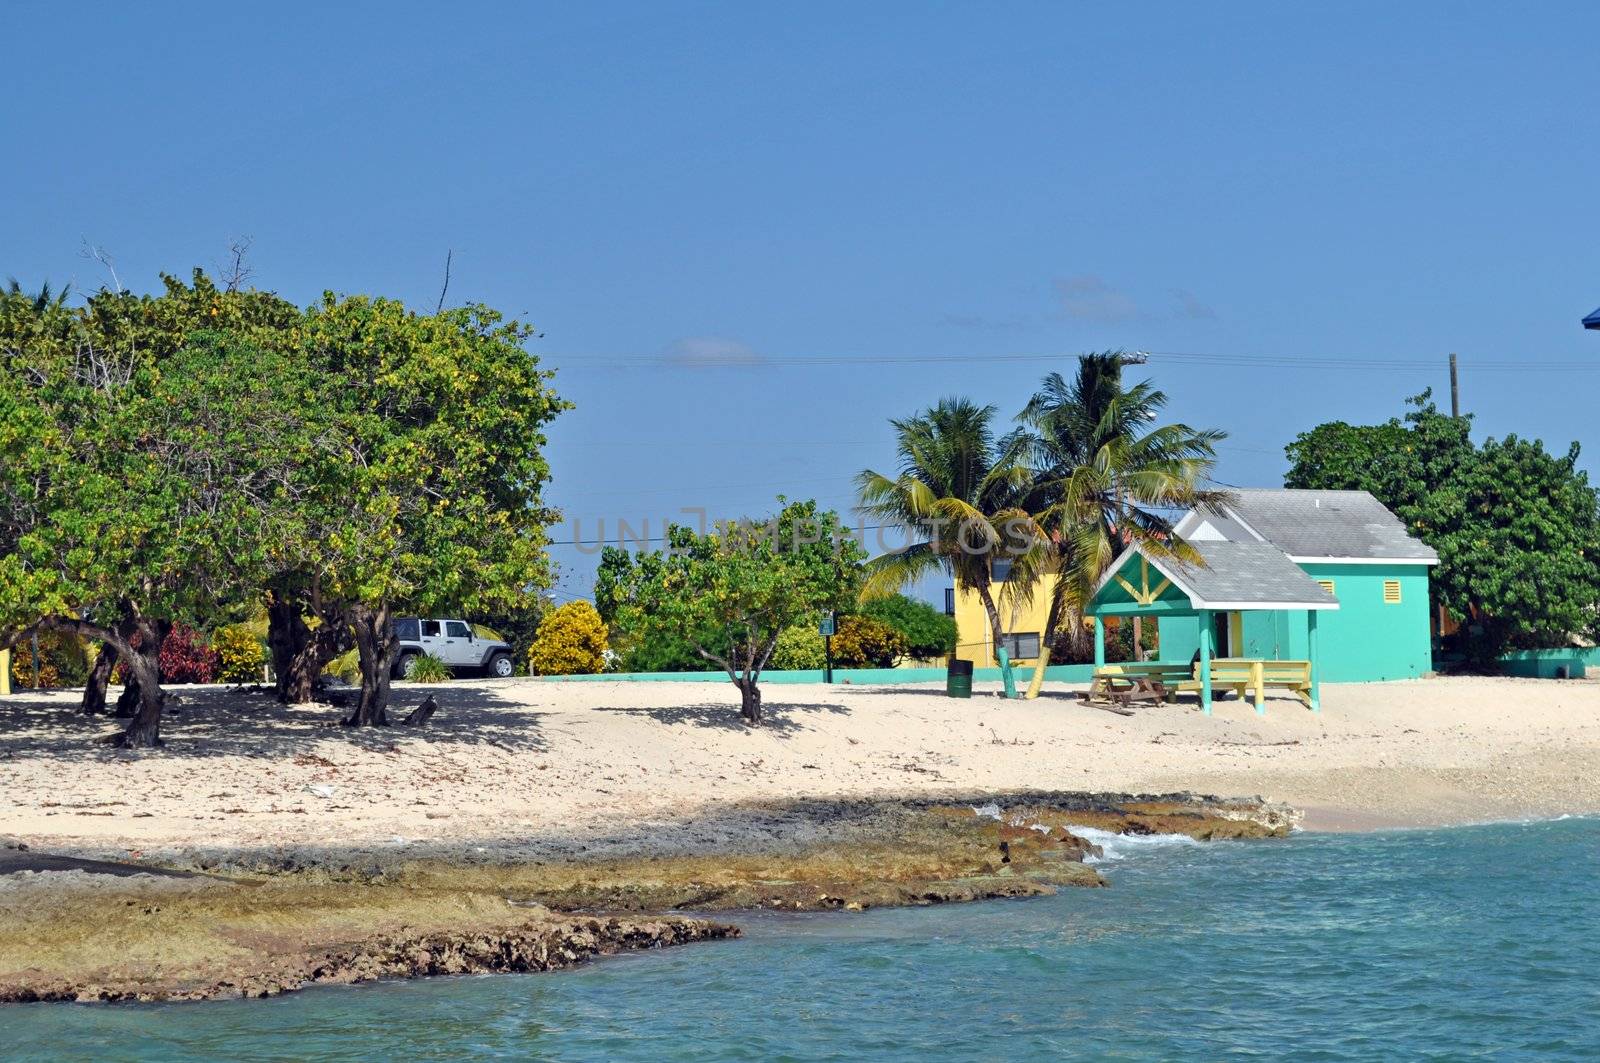 Tranquil public beach in the West Bay district of Grand Cayman